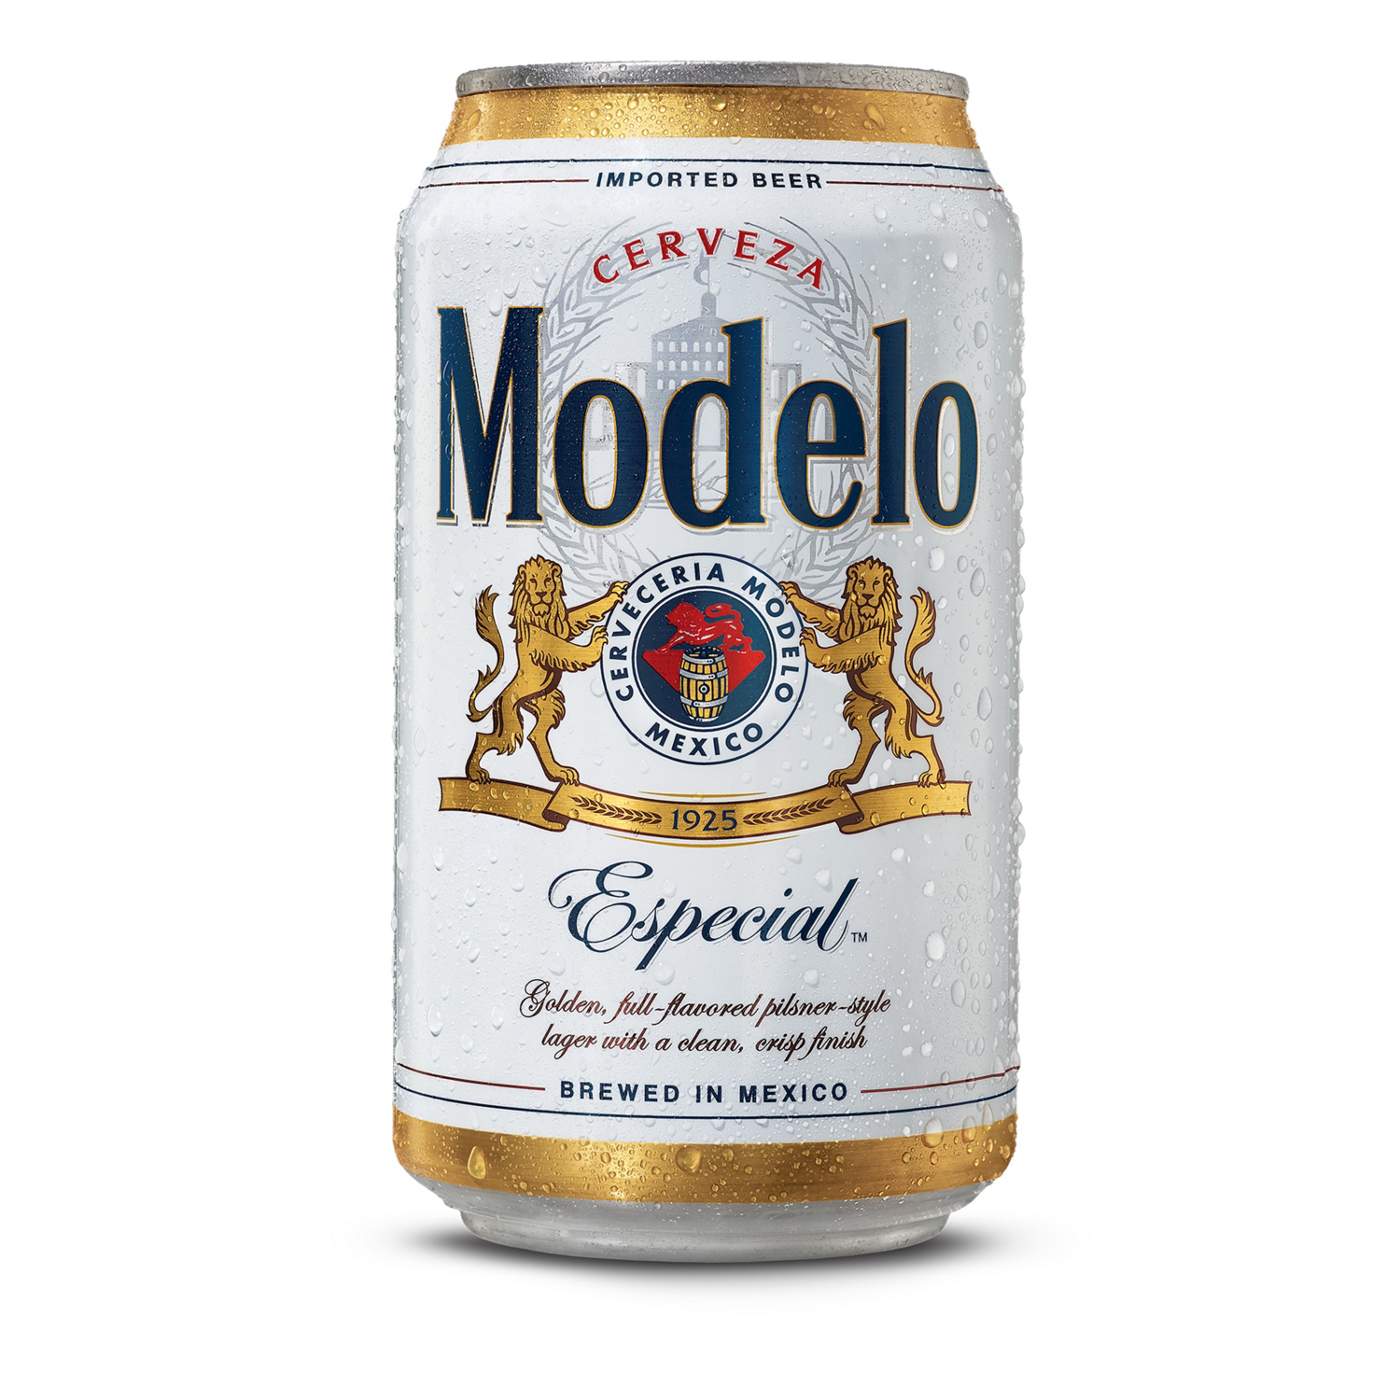 Modelo Especial Mexican Lager Import Beer 12 oz Cans, 12 pk; image 2 of 7